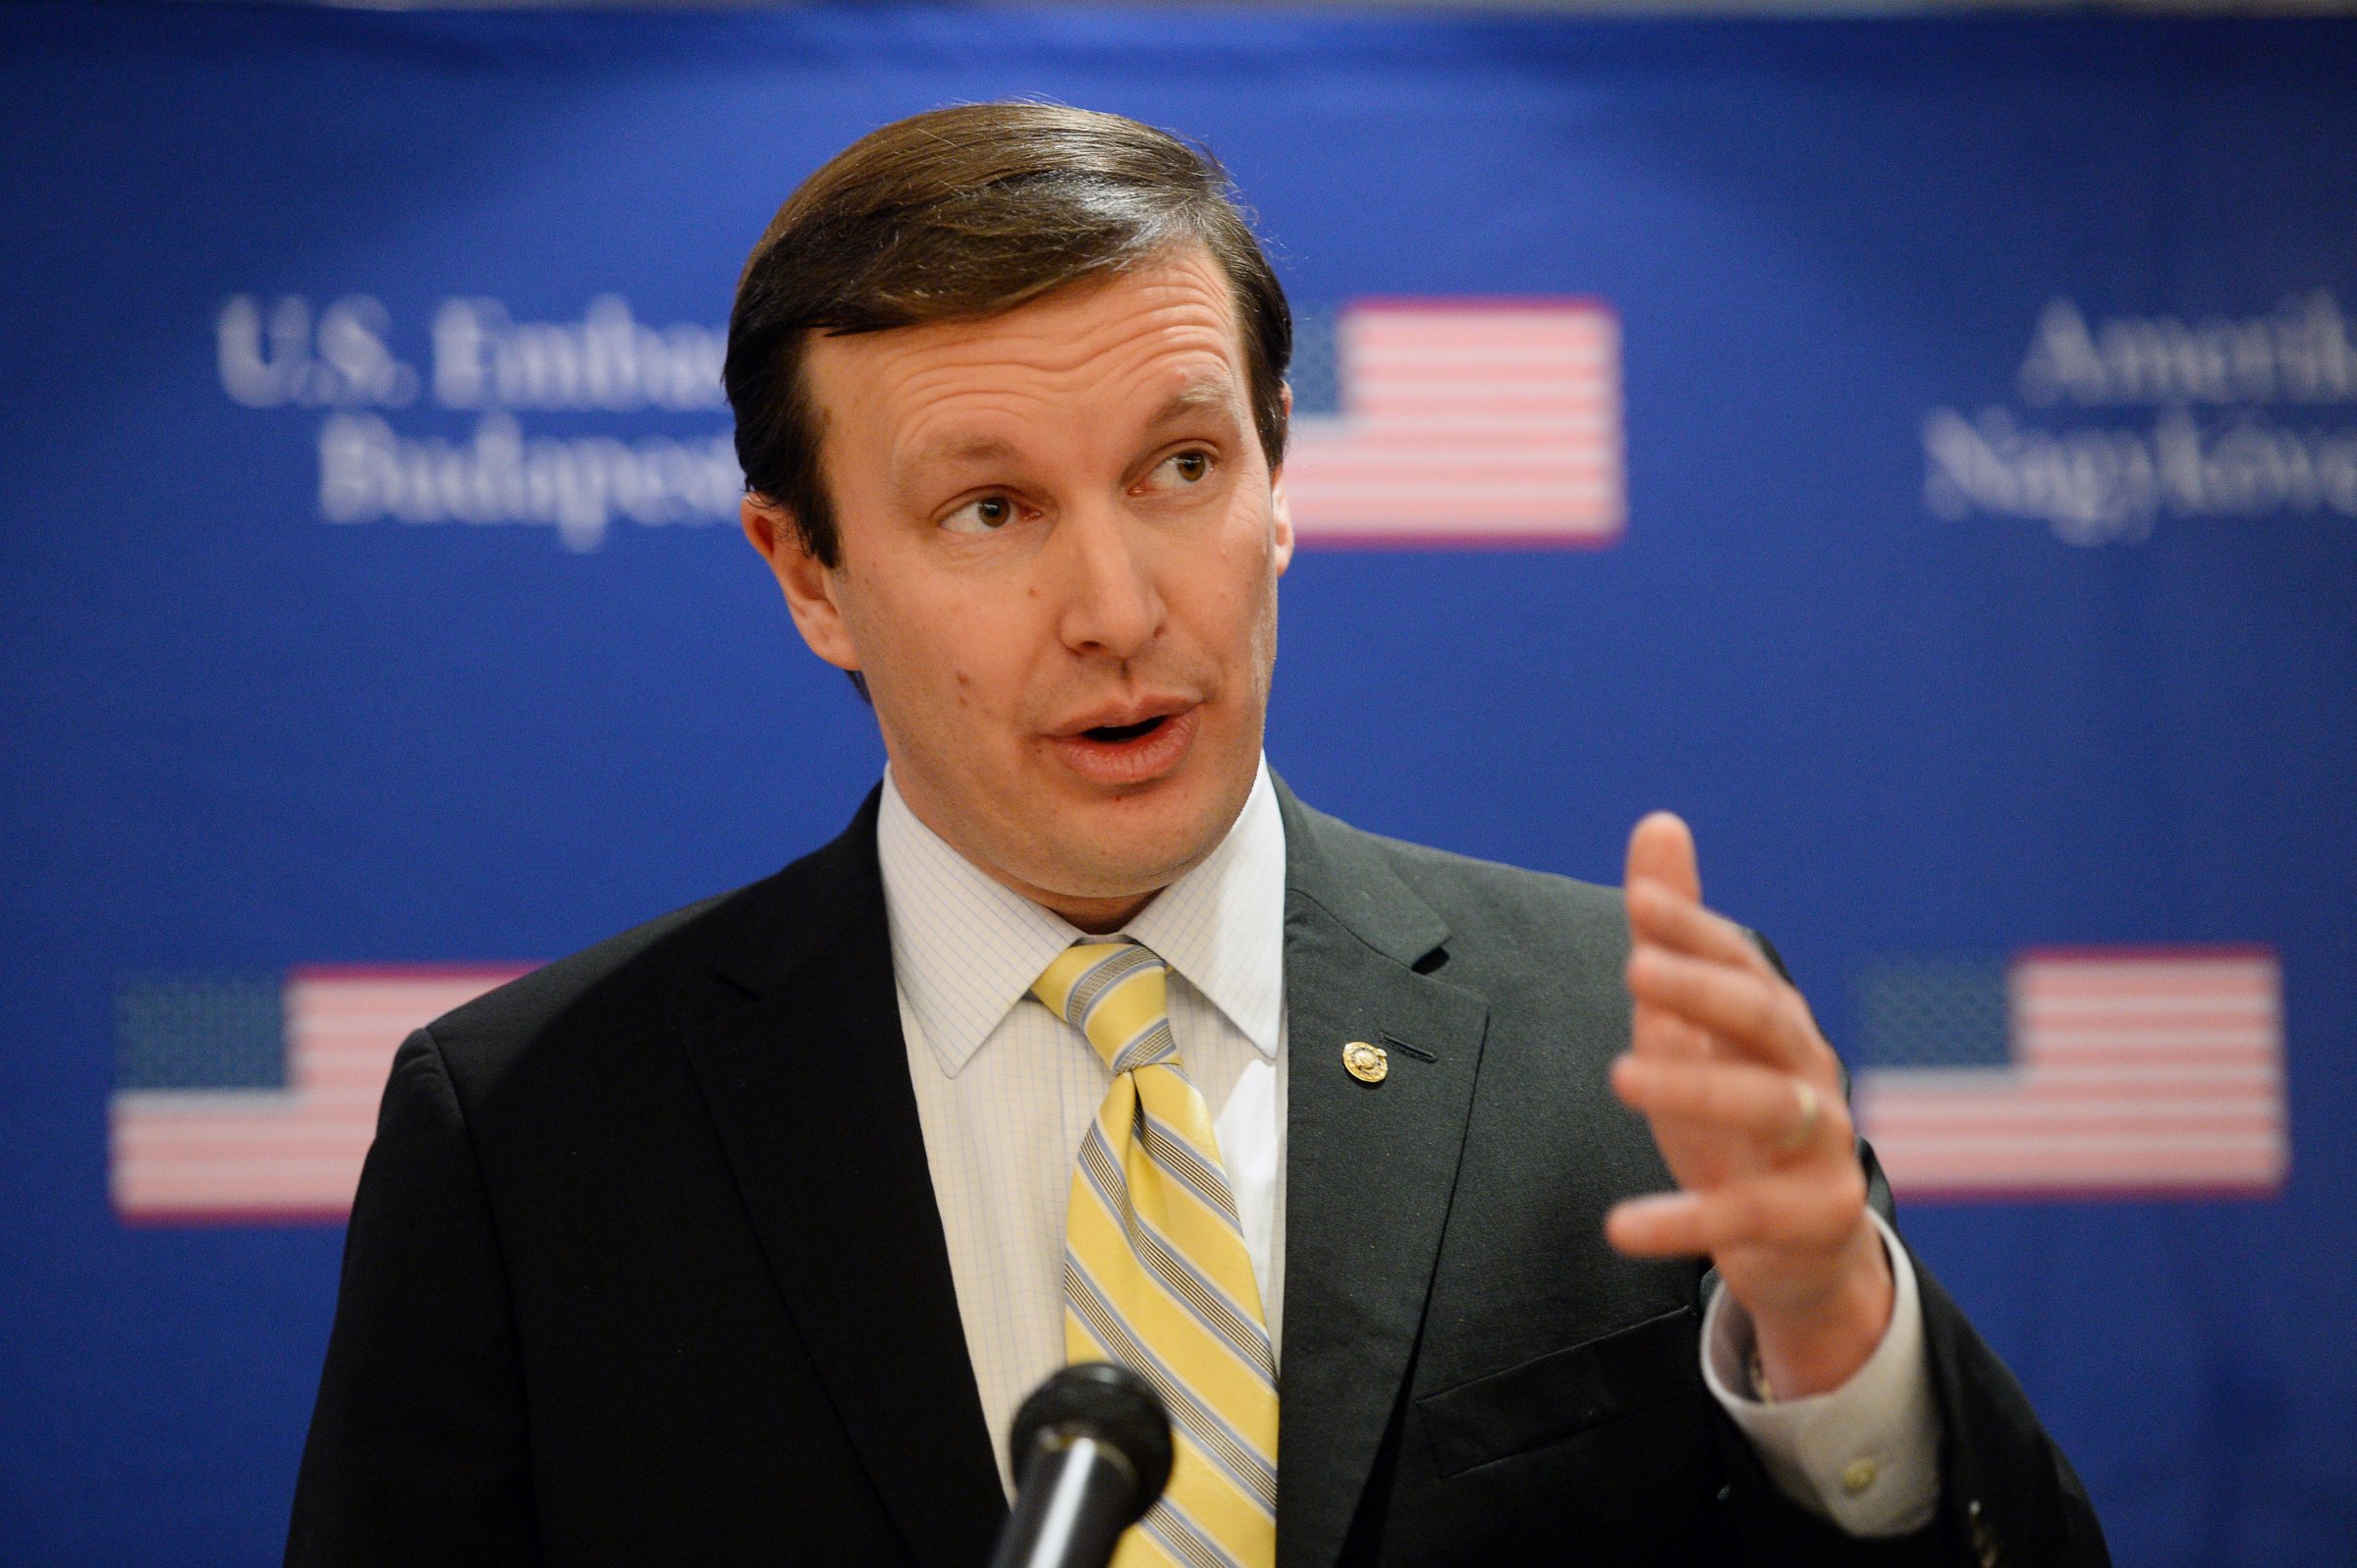 Junior United States Senator from Connecticut Chris Murphy addresses journalists in Budapest on Jan. 31, 2014.